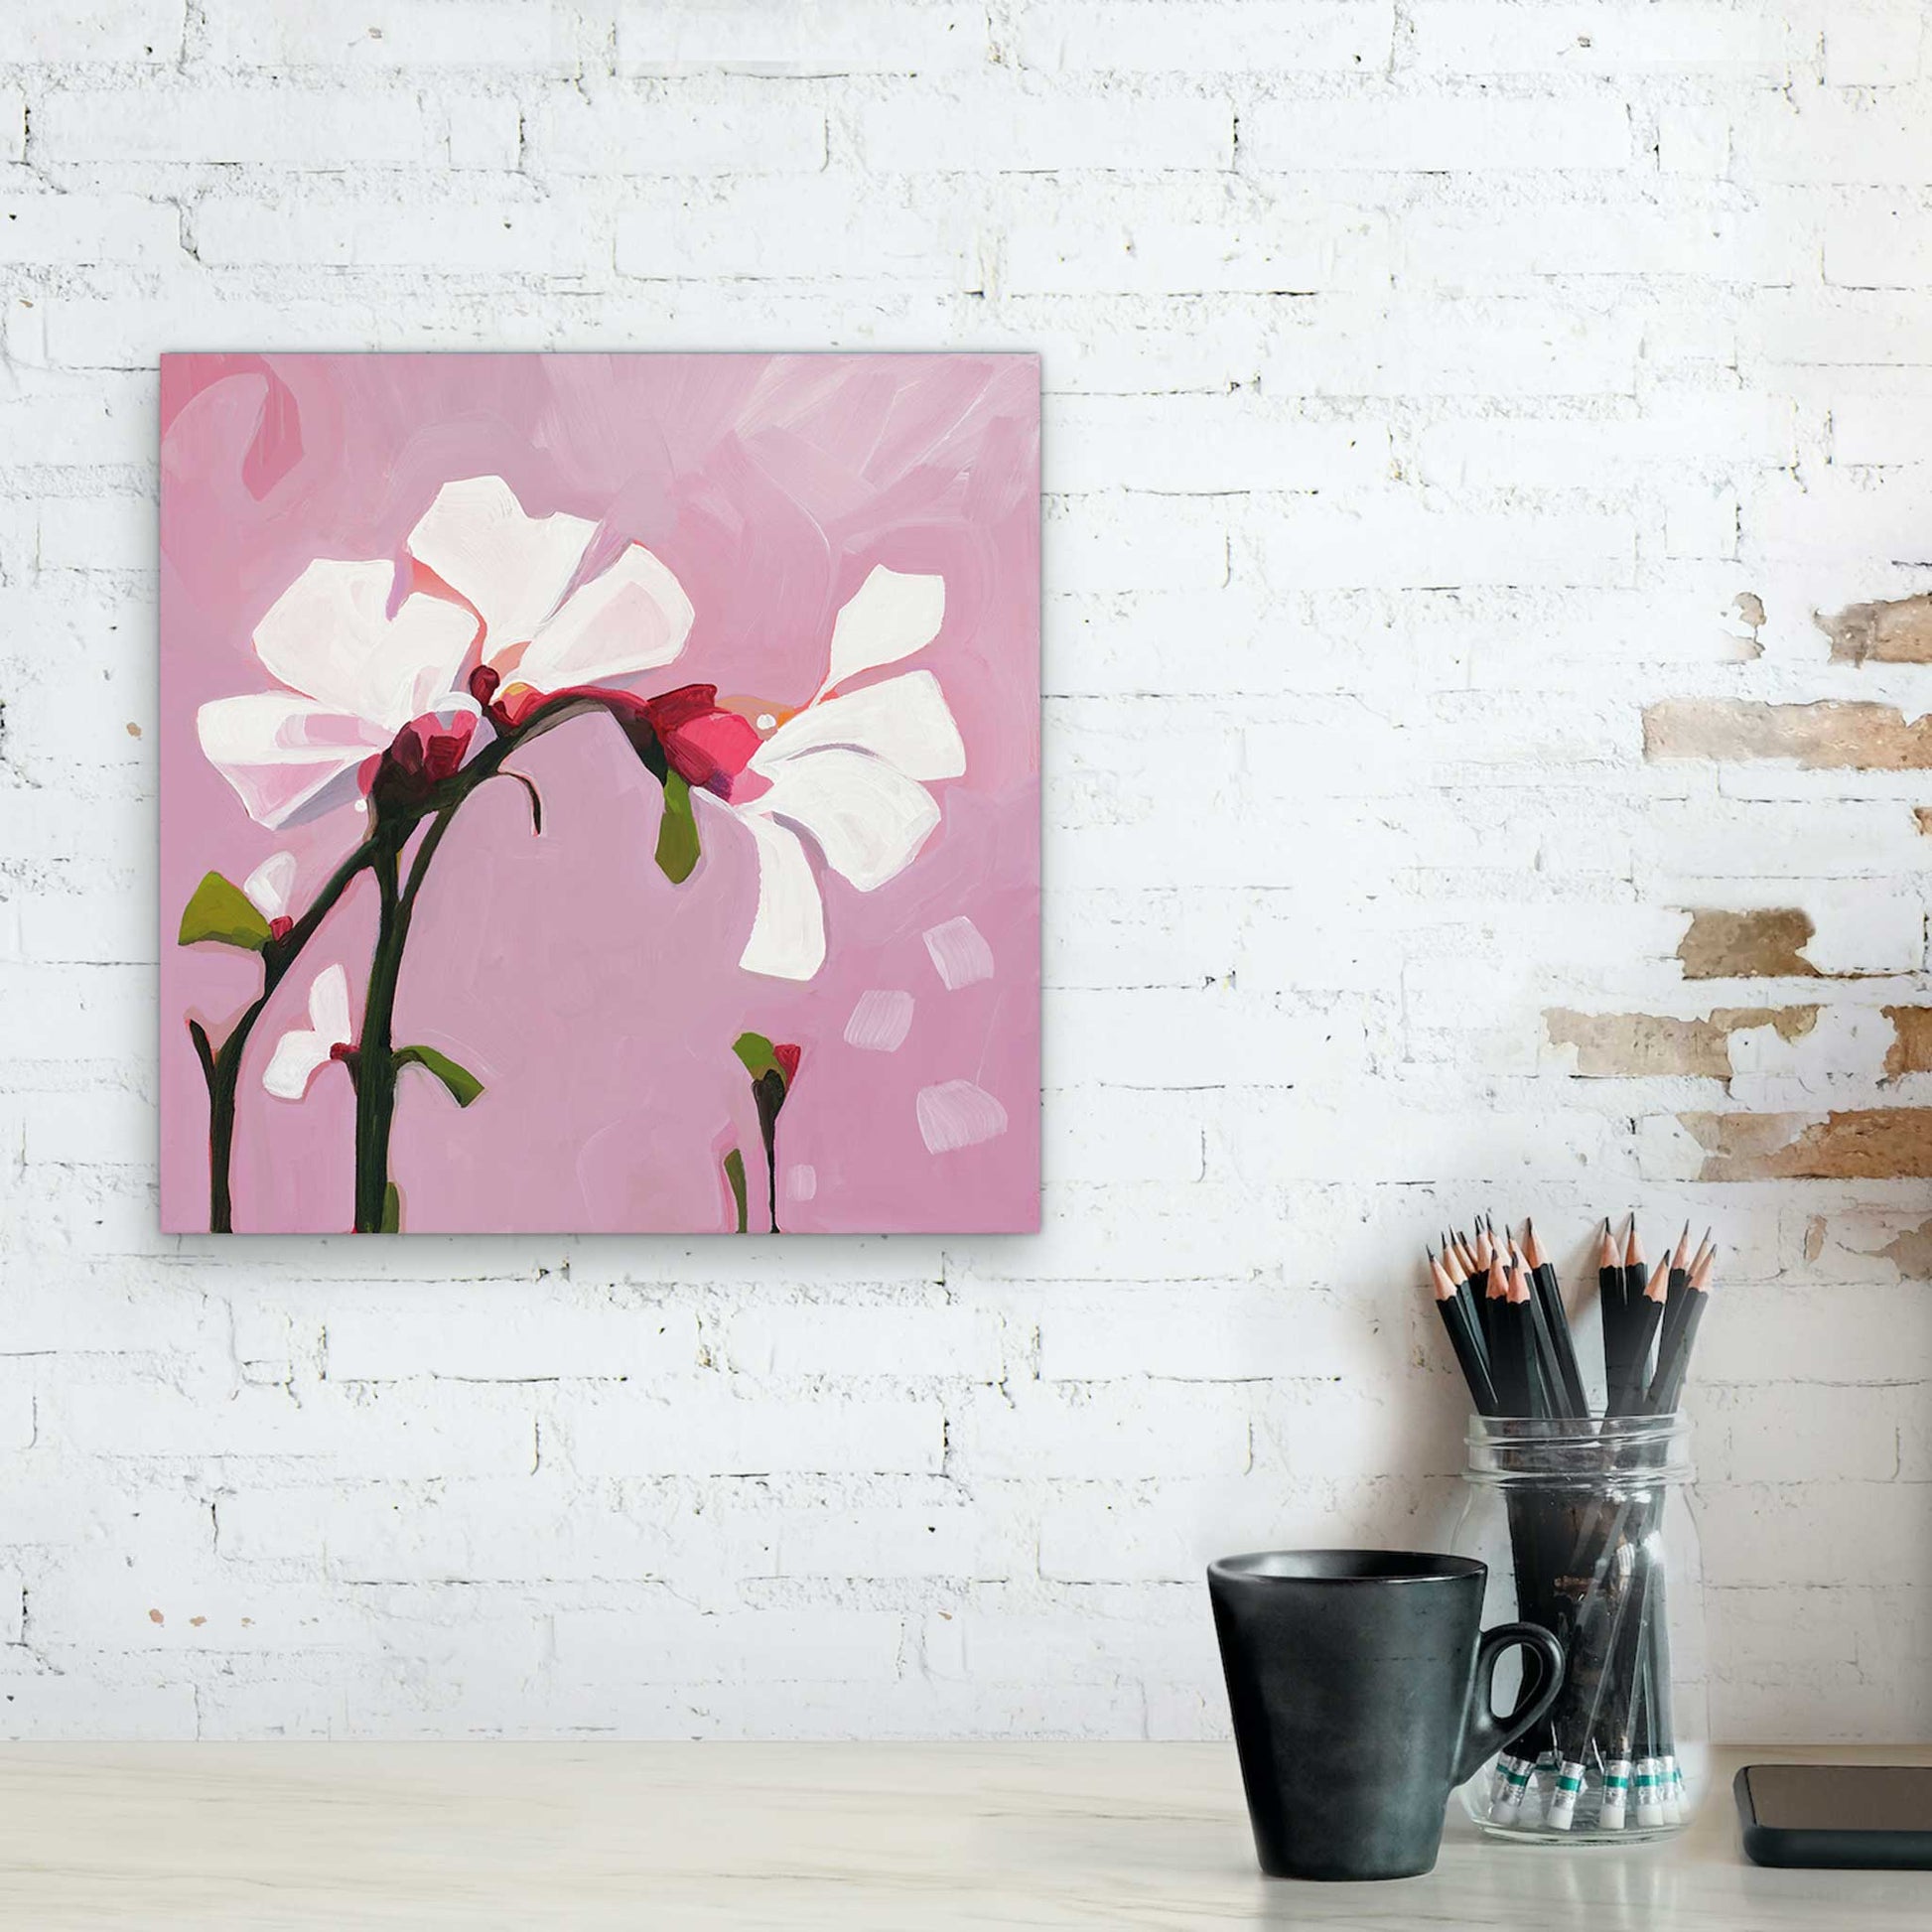 Acrylic flower painting canvas floral art abstract flower by Canadian artist Susannah Bleasby